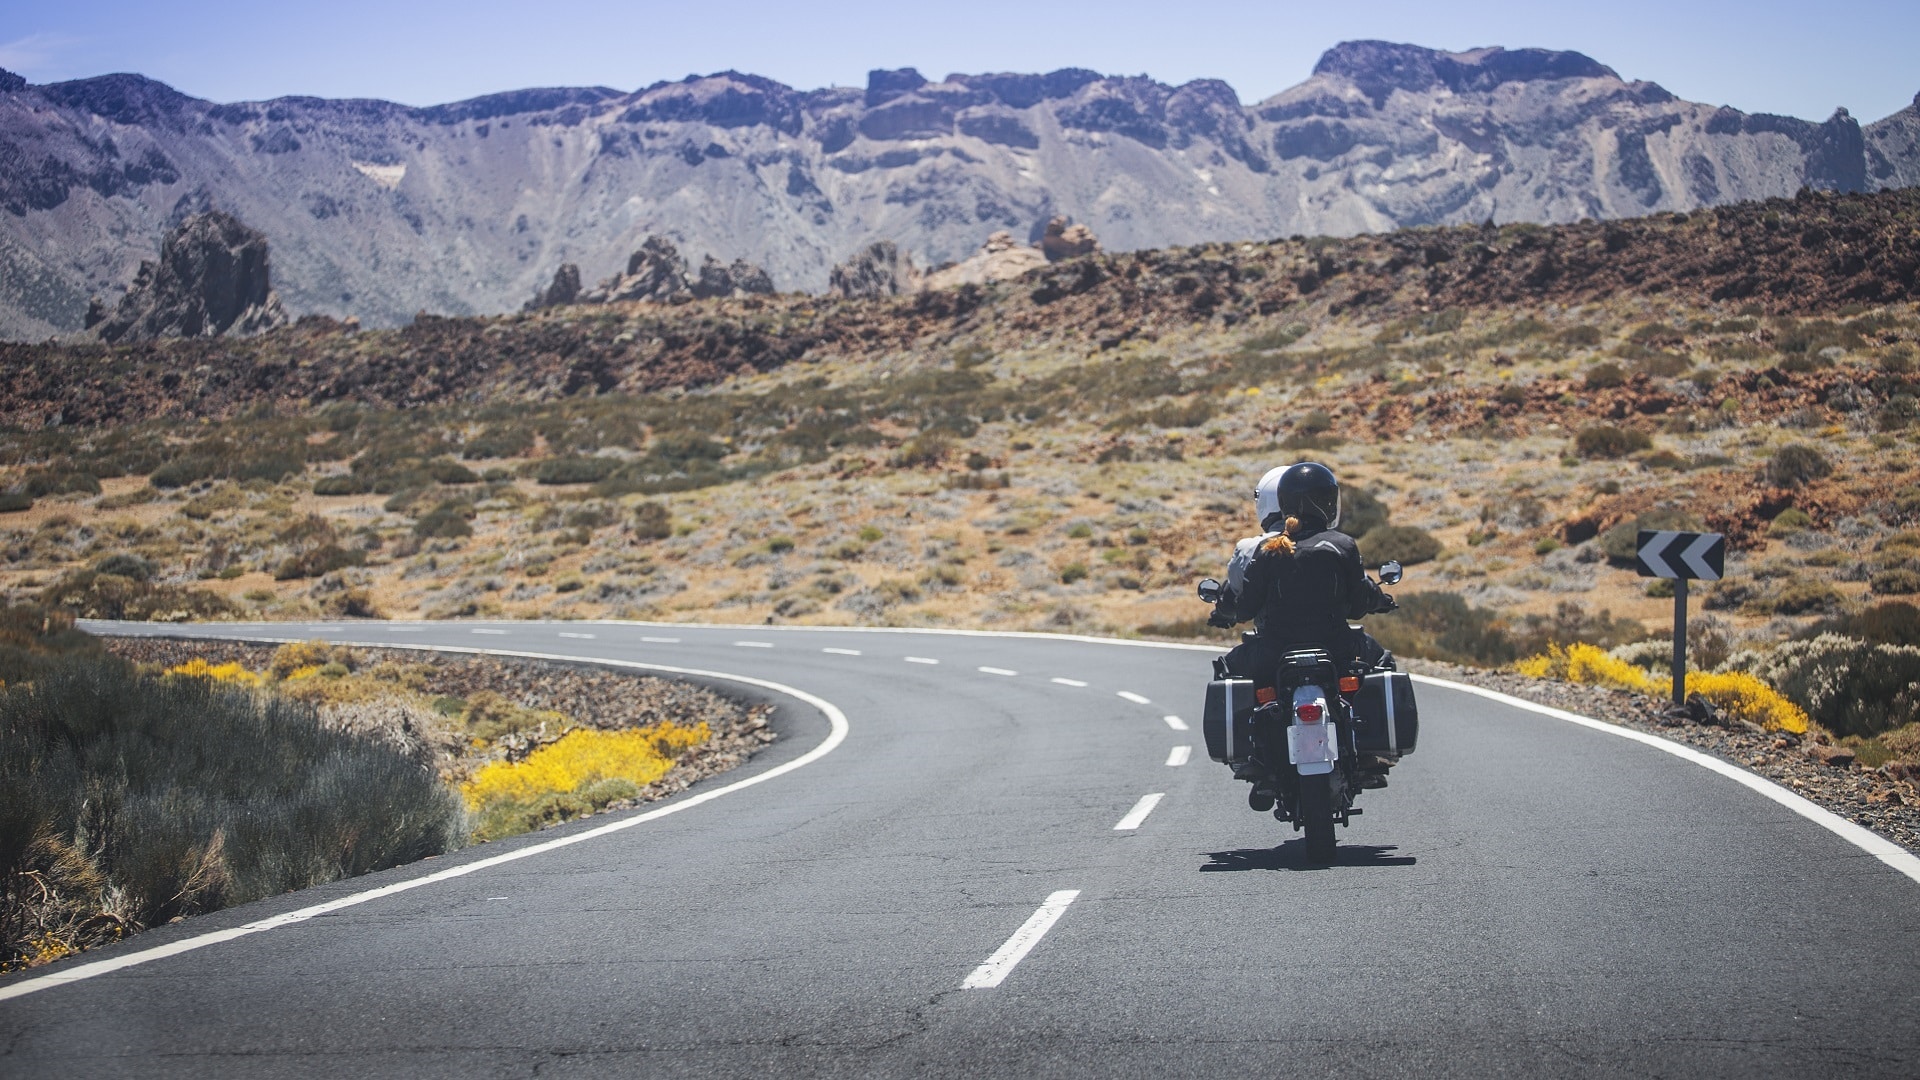 What Is A Safe Distance When Traveling Behind a Motorcycle